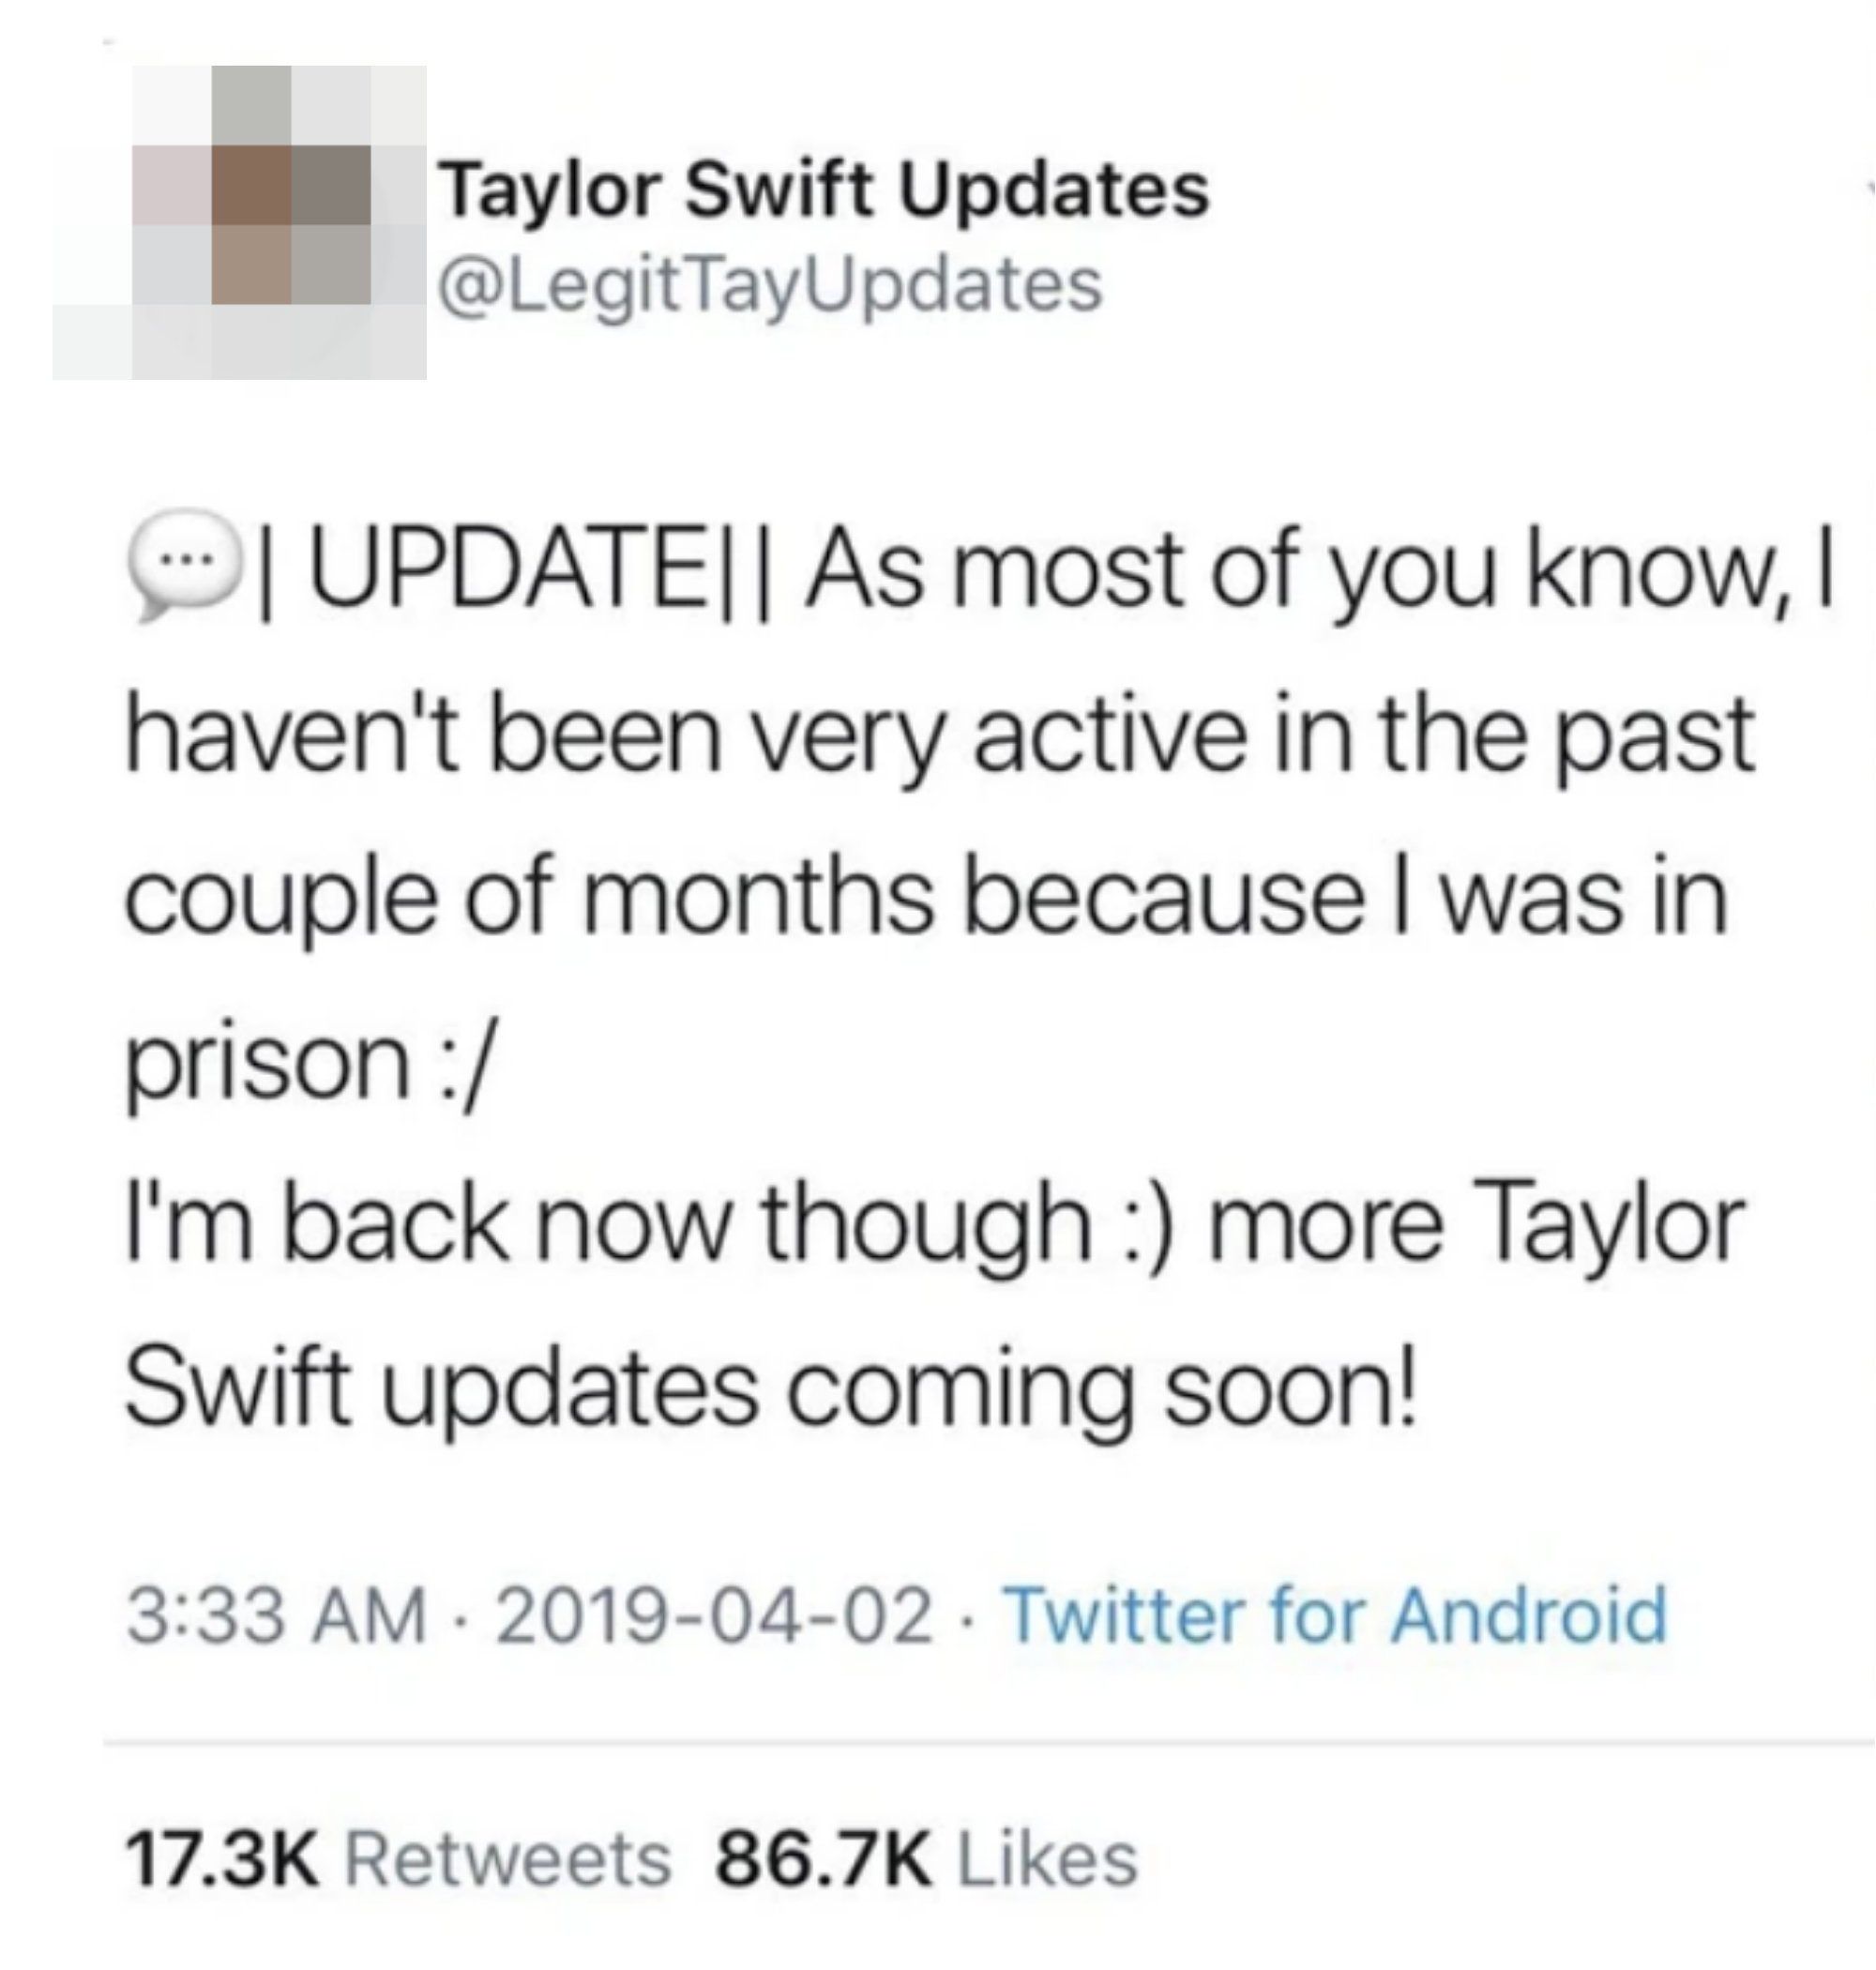 &quot;more Taylor Swift updates coming soon!&quot;